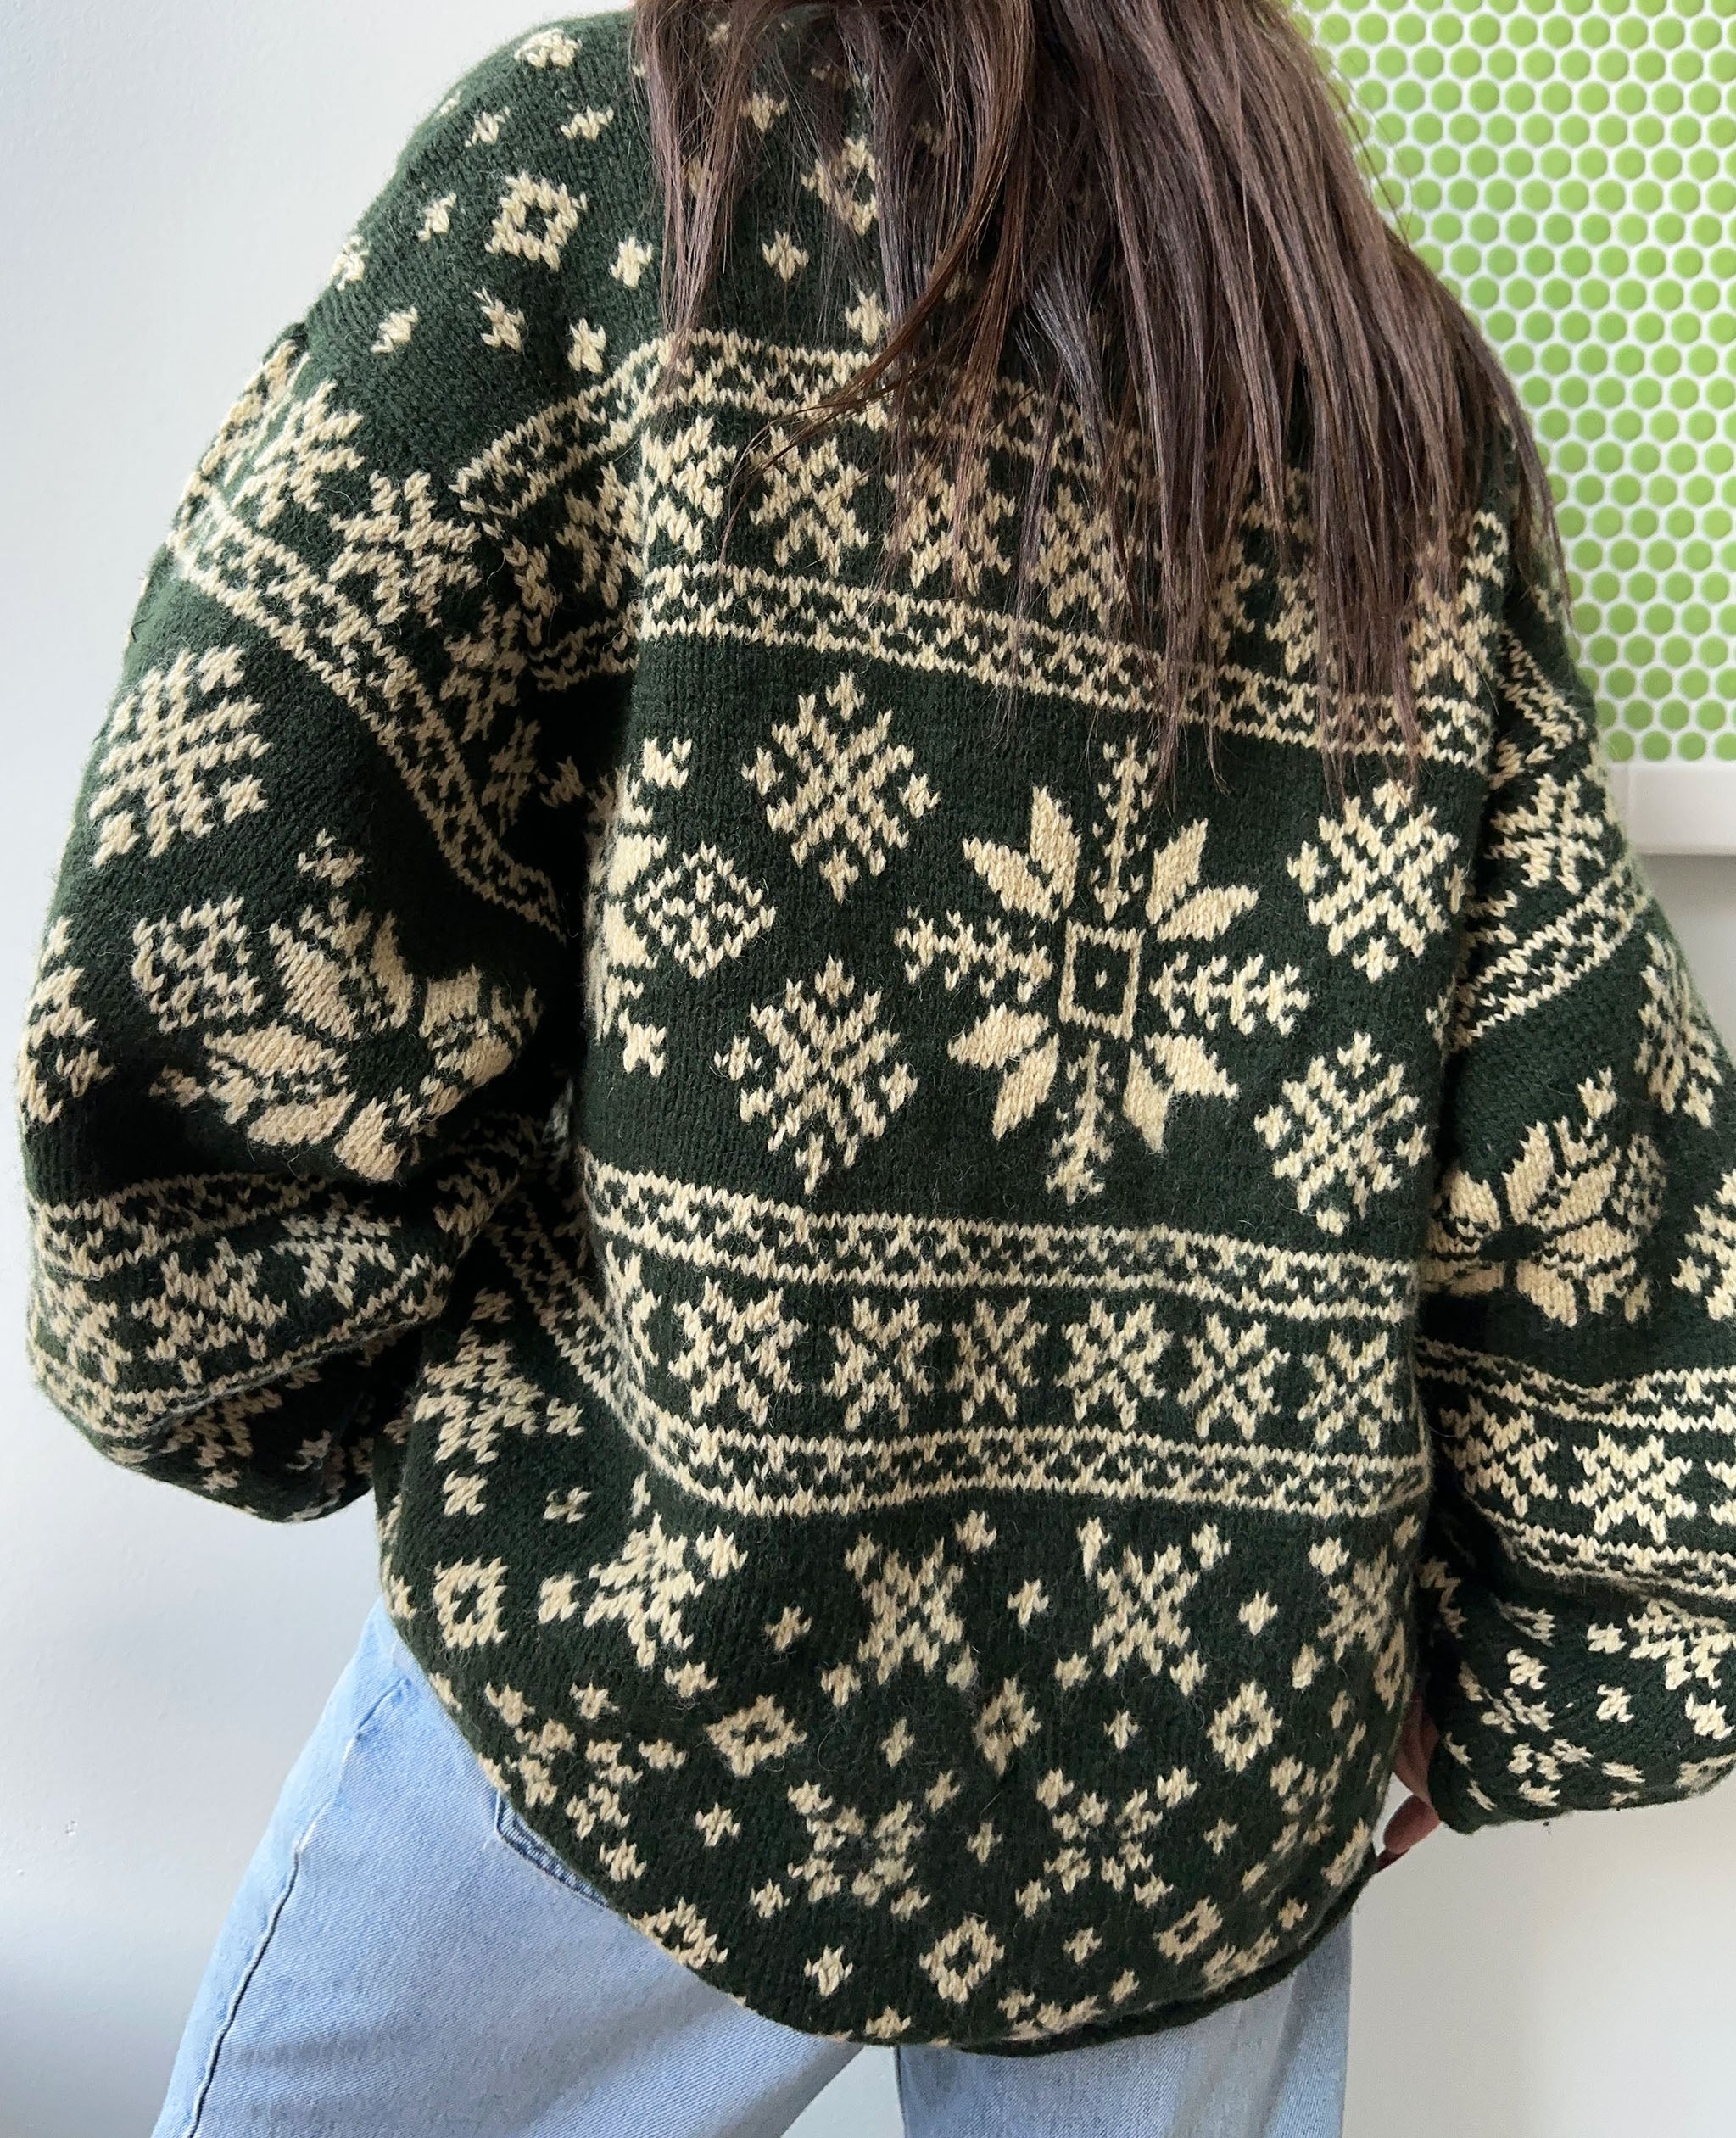 Green and Cream Patterned Sweater